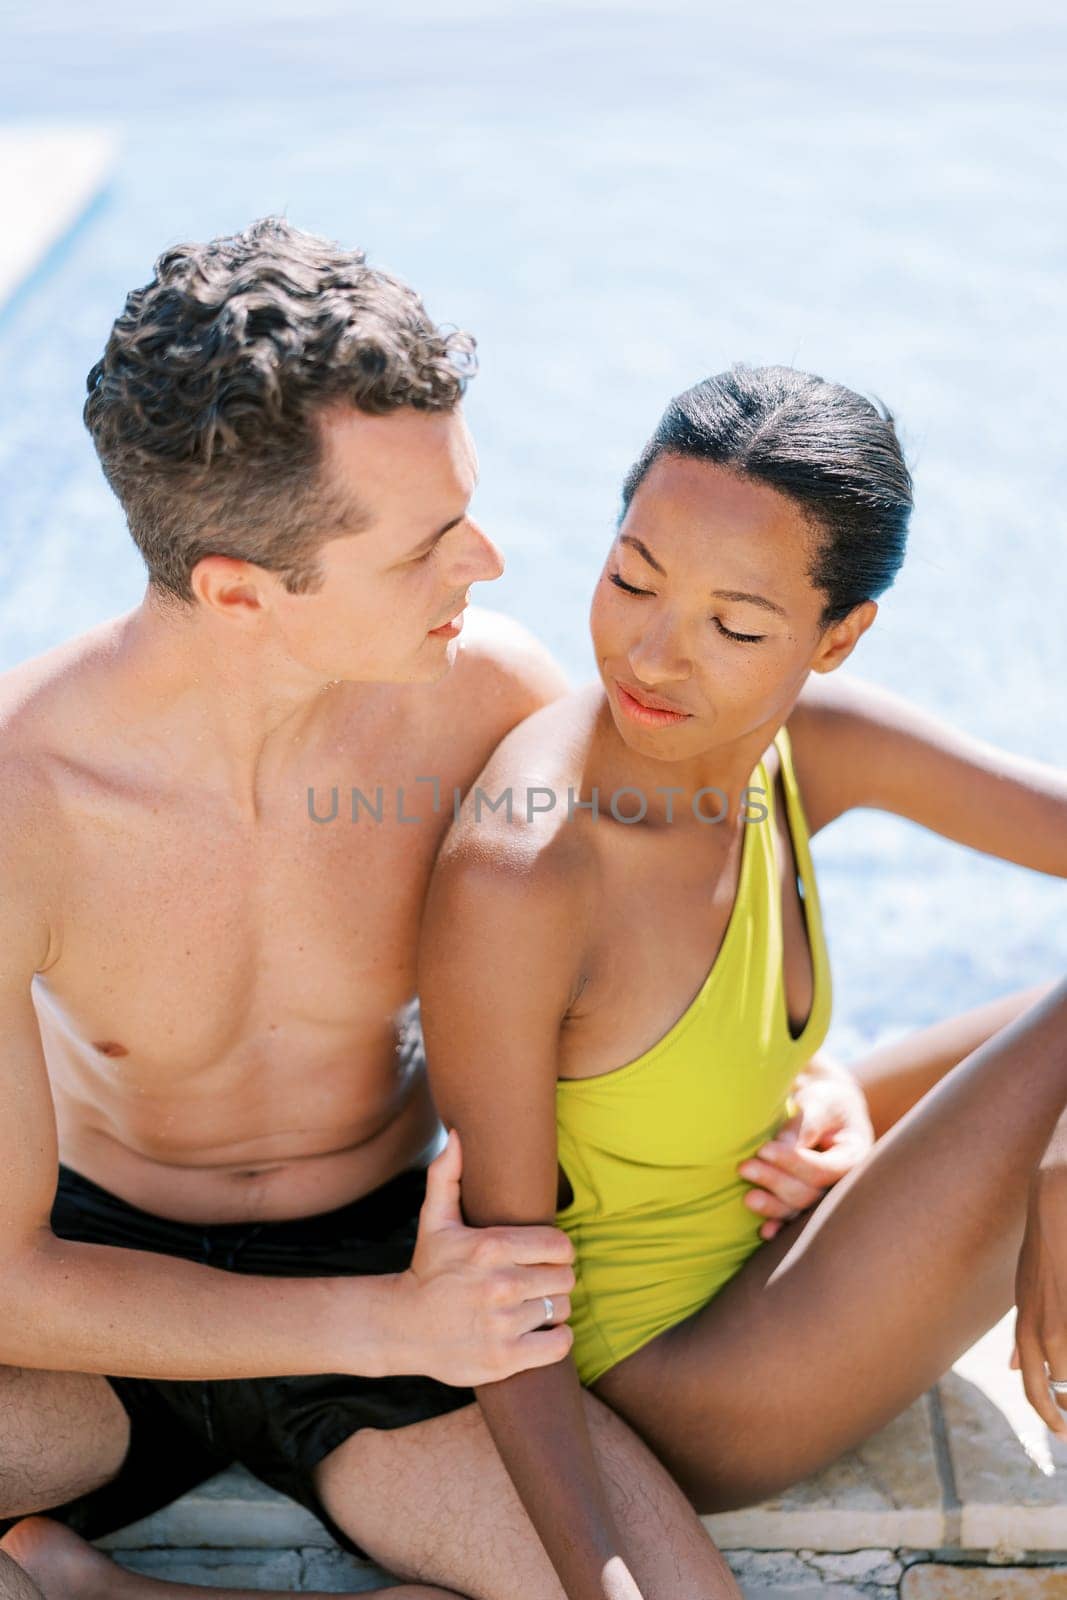 Man hugging woman waist from behind, looking at her, sitting on edge of pool. High quality photo